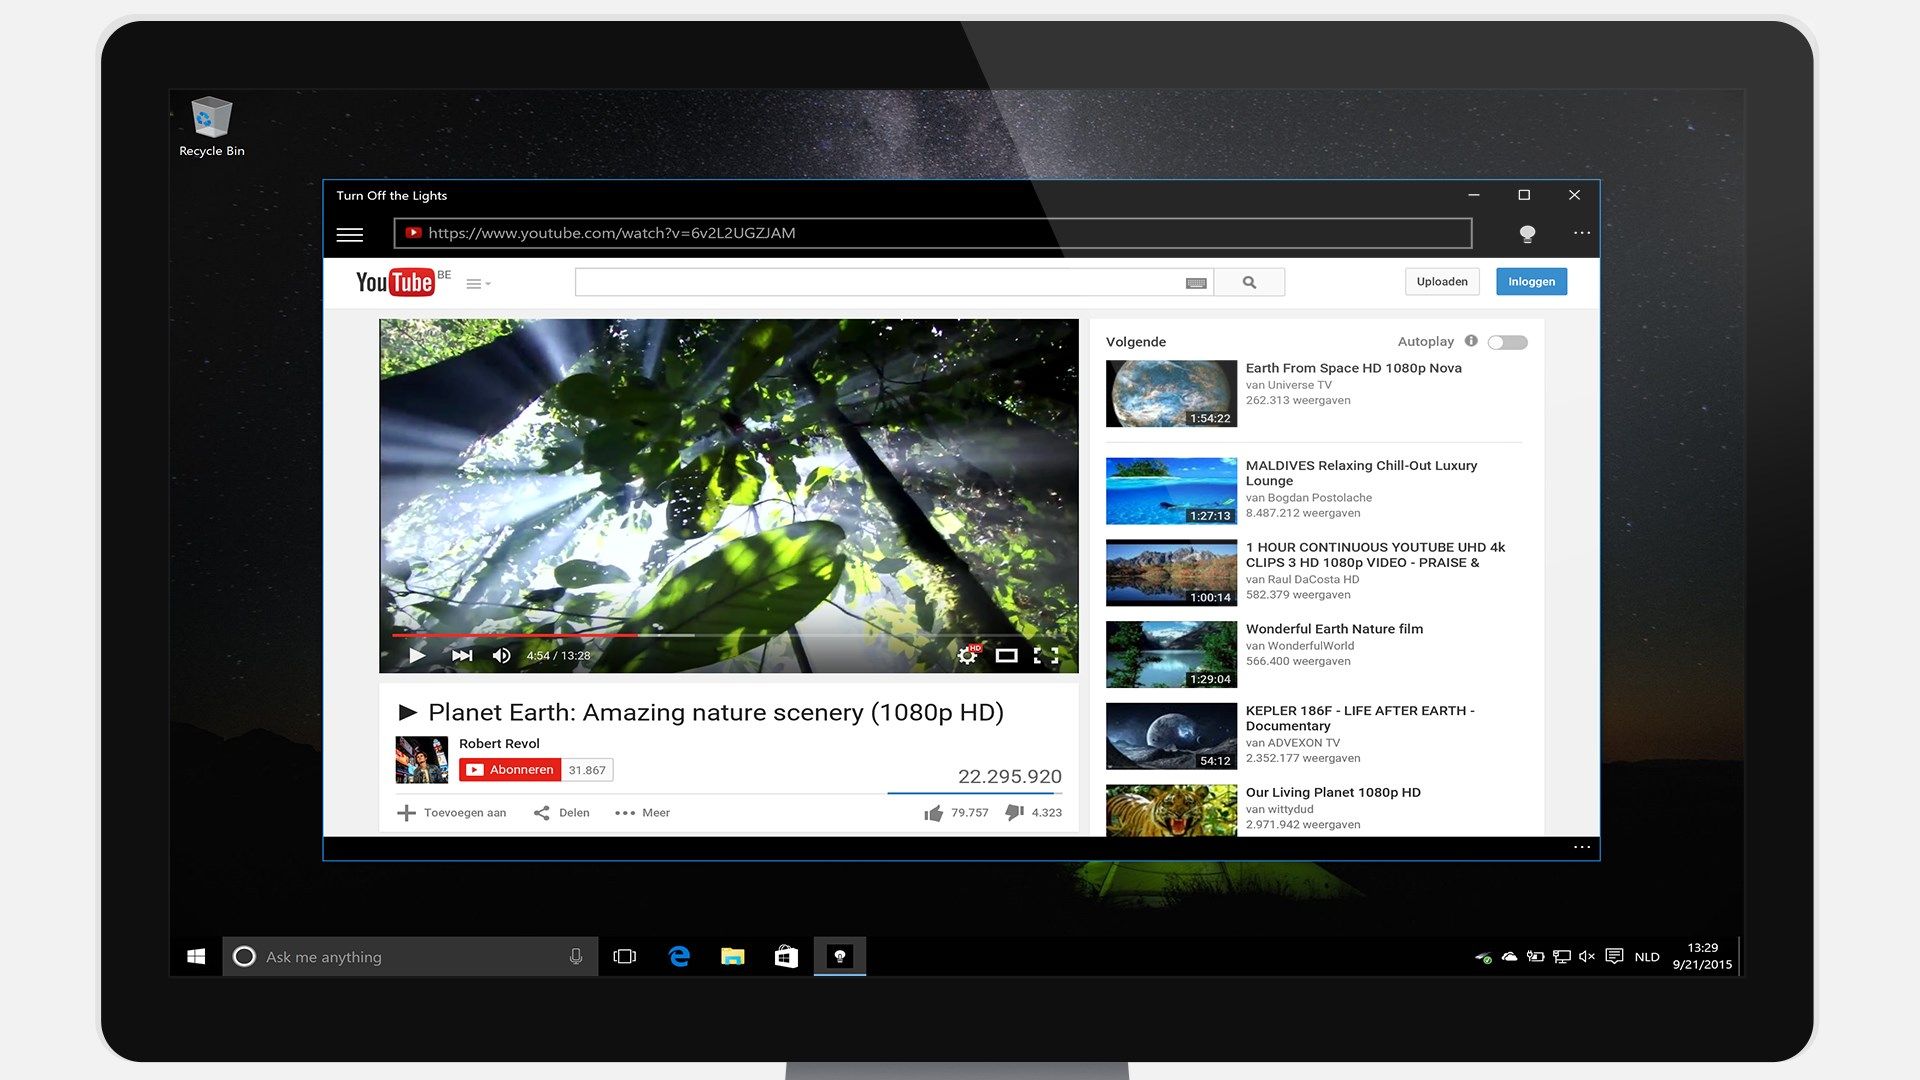 Turn Off the Lights have a simple and easy user interface. Great for on YouTube or other video website.